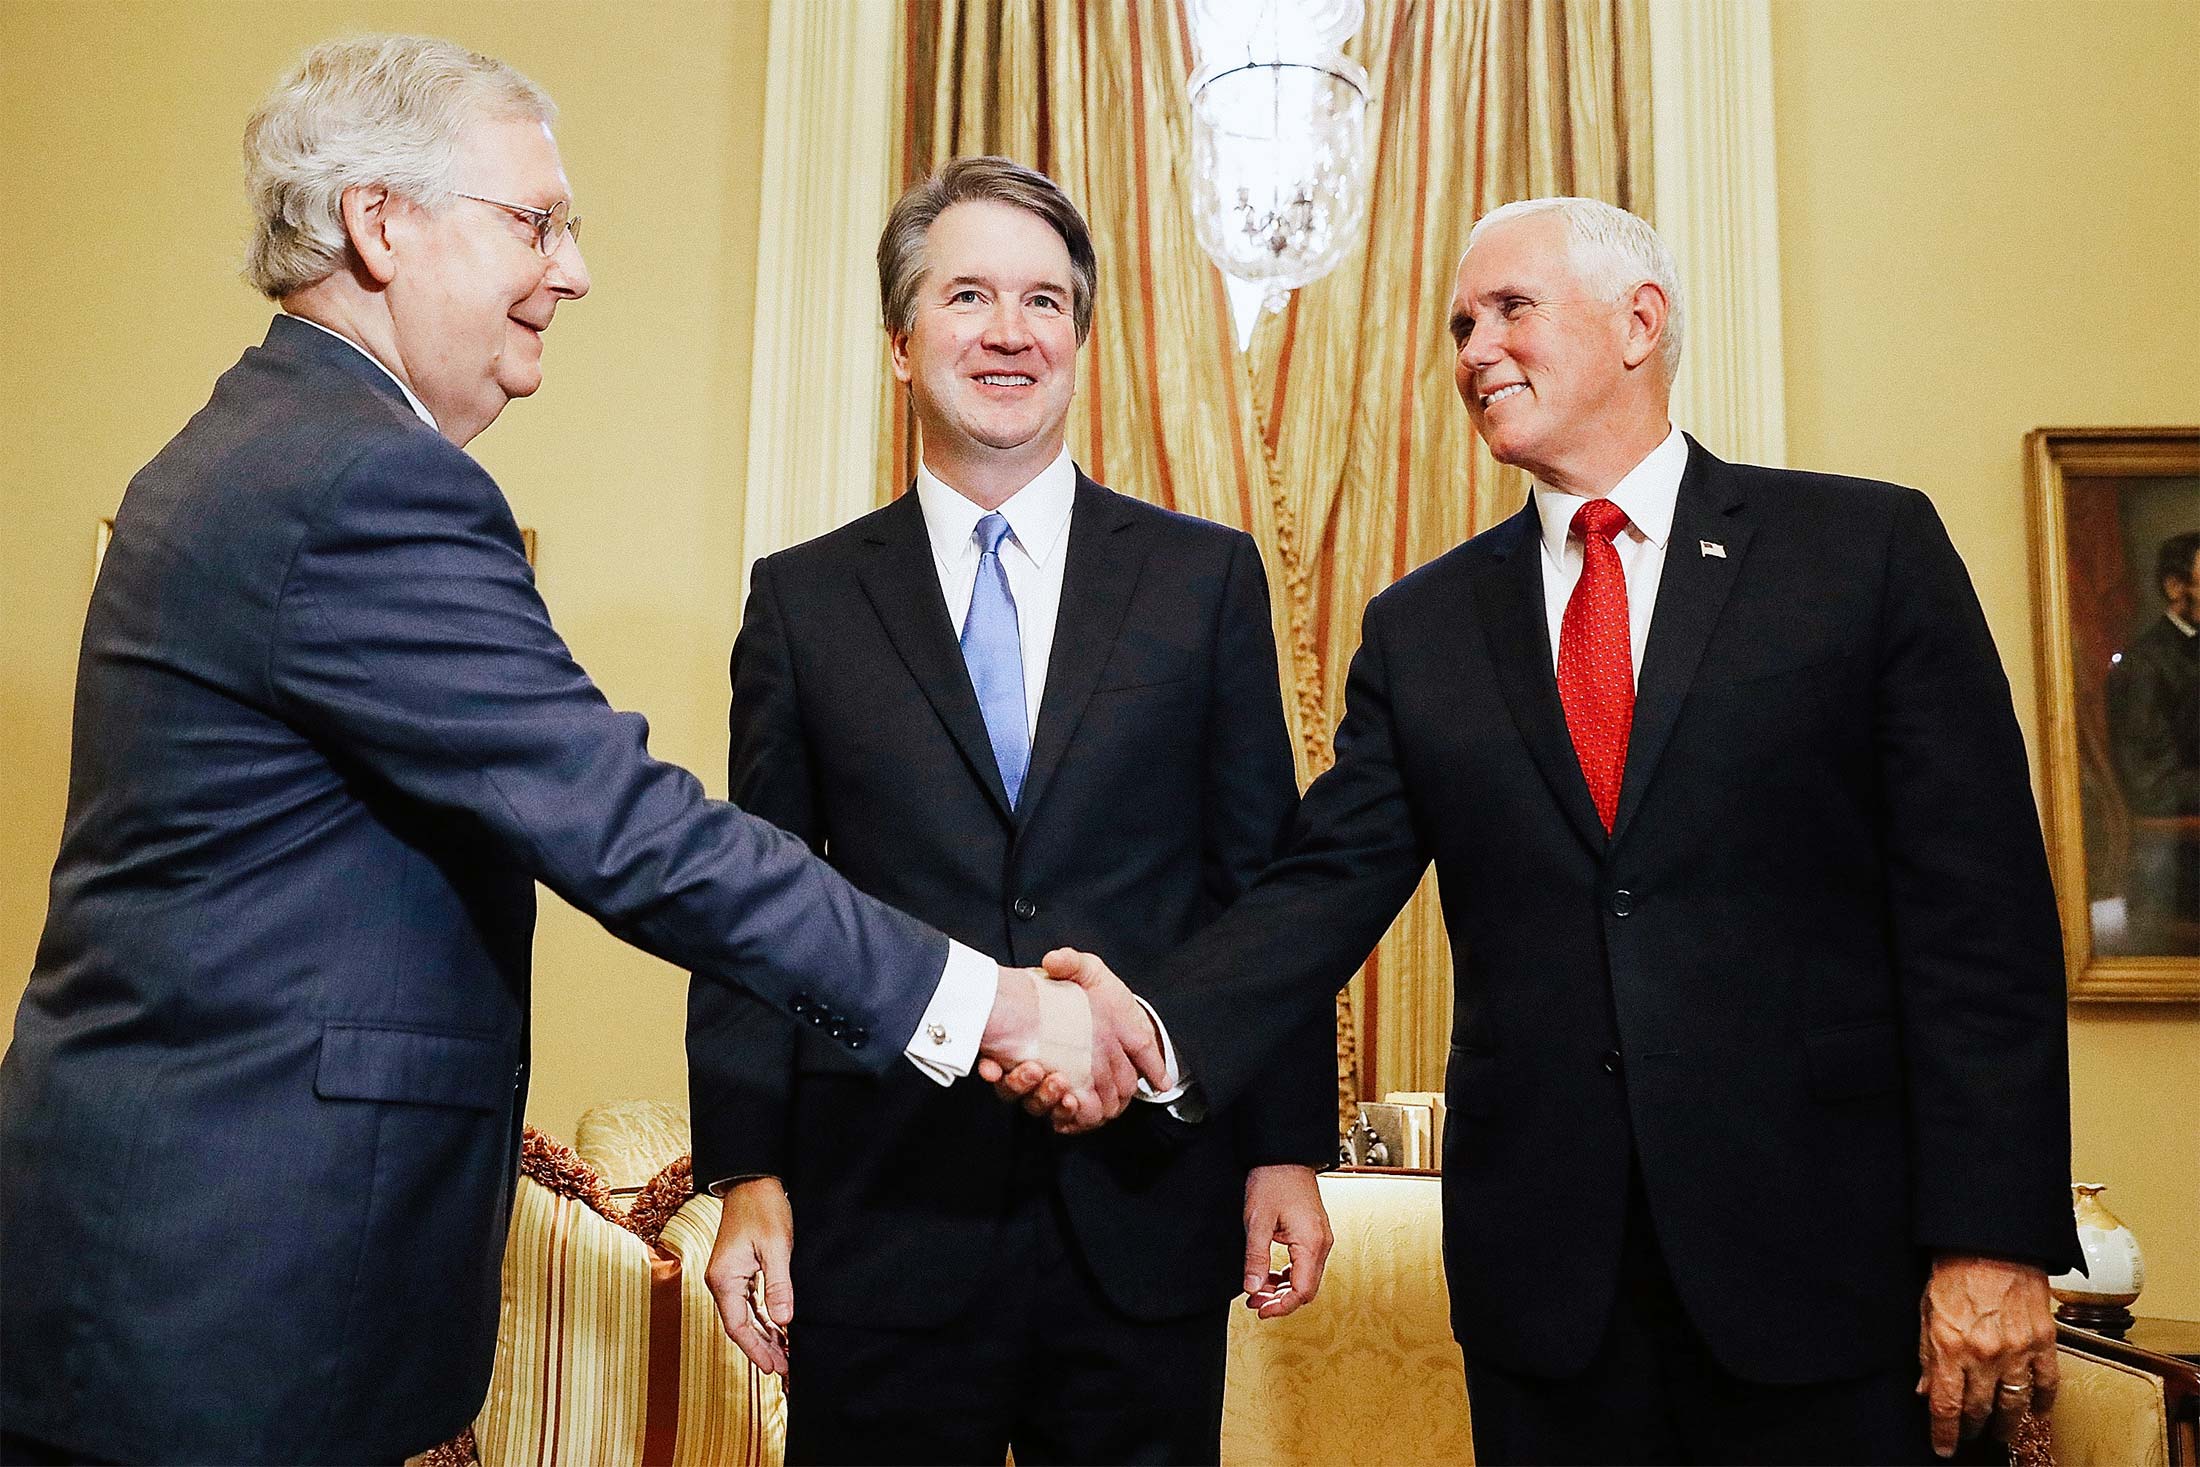 Judge Brett Kavanaugh between Senate Majority Leader Mitch McConnell and Vice President Mike Pence before a meeting at the U.S. Capitol on Tuesday.